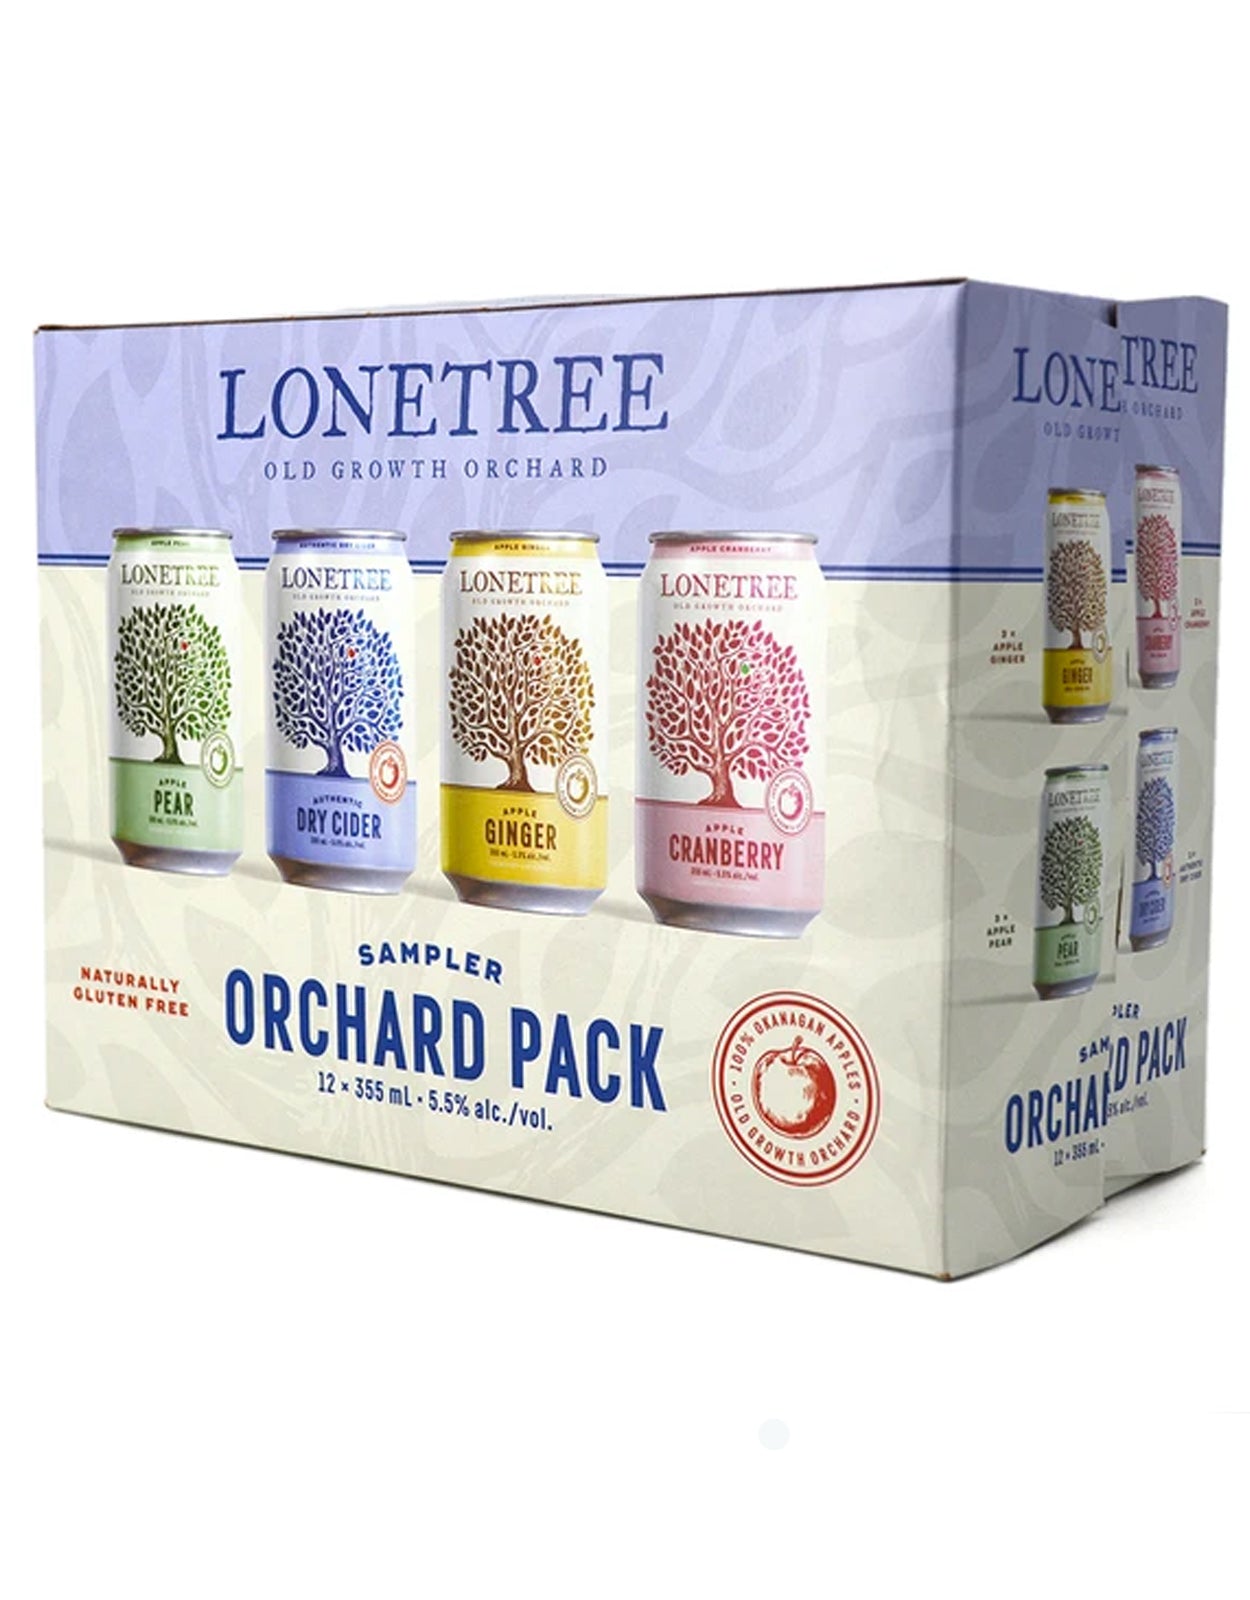 Lonetree Sampler - 12 Cans